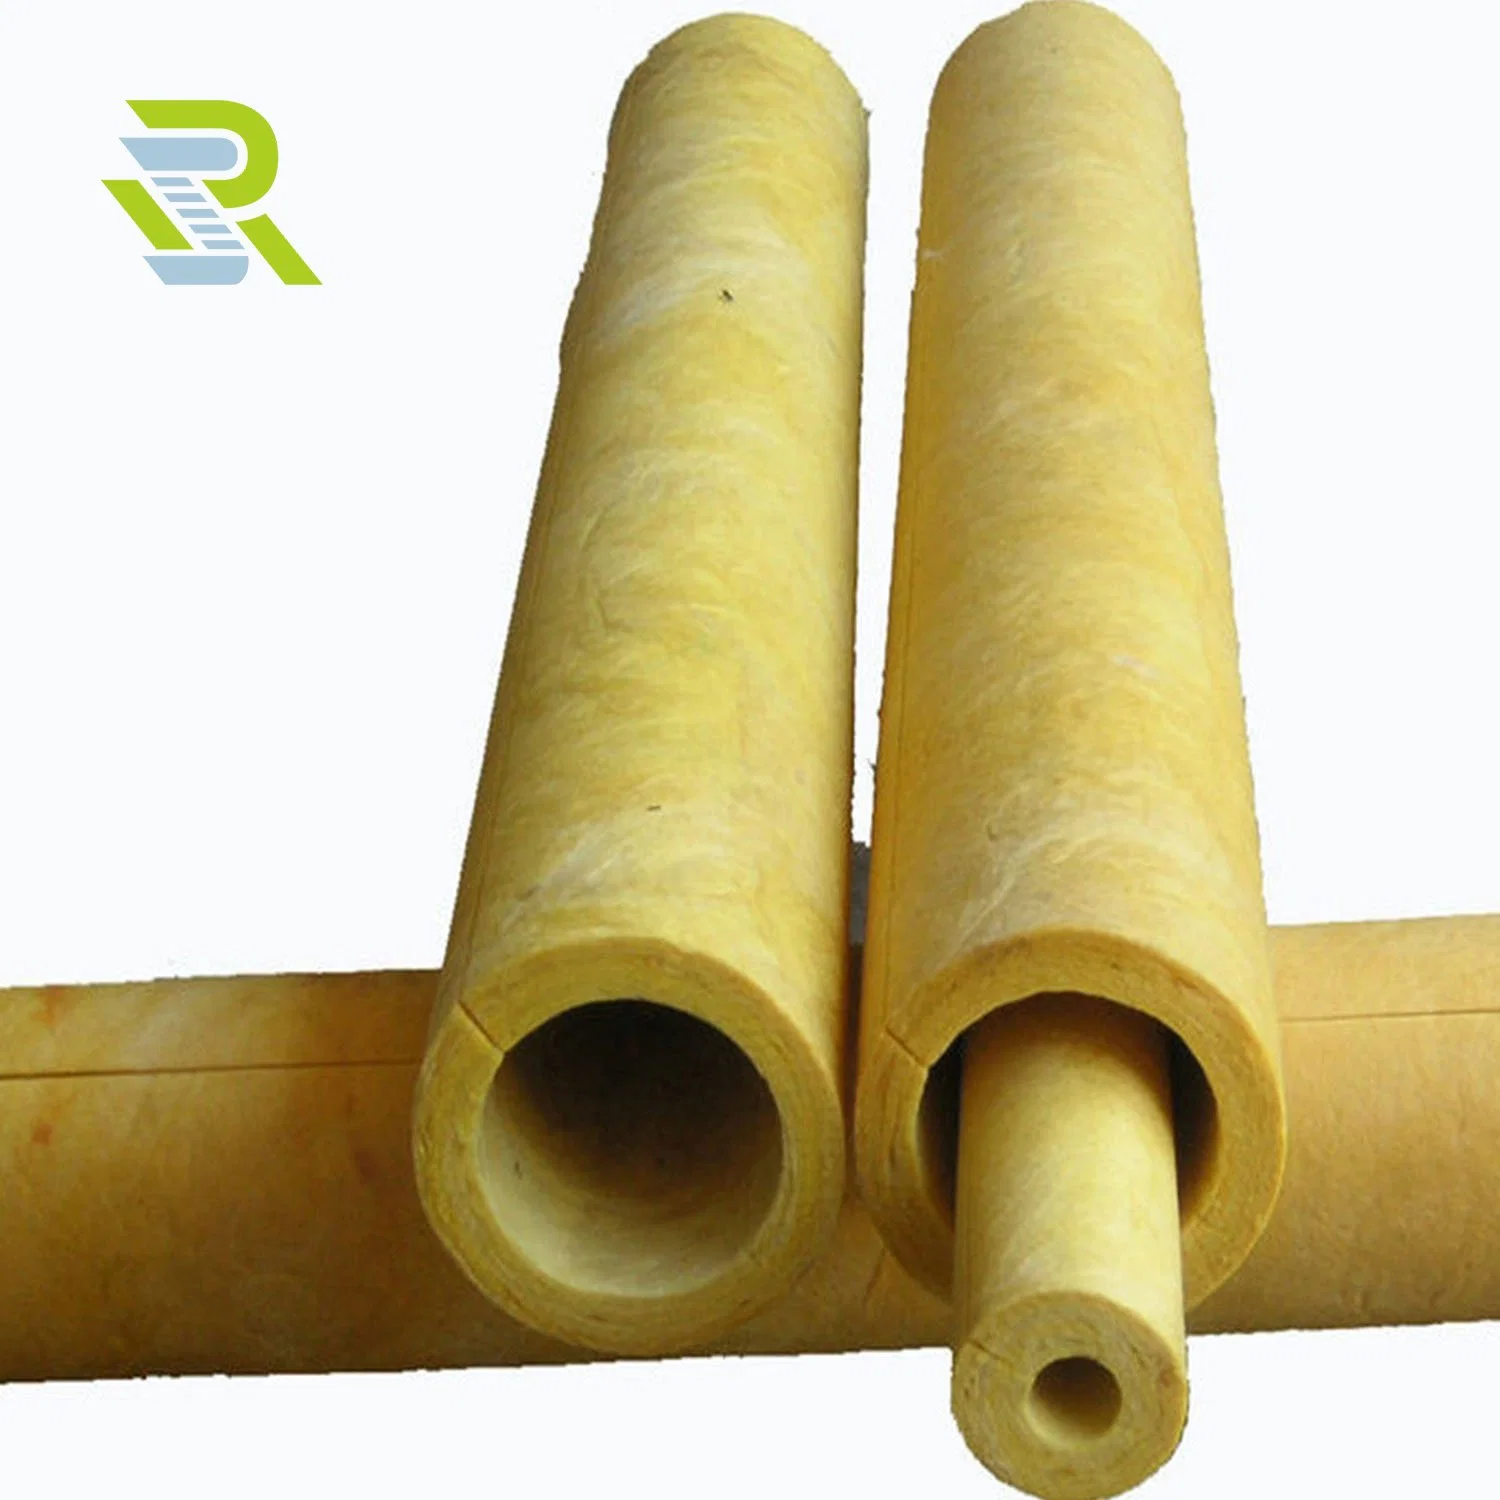 Rock Wool Pipe for Marine's Fireproof and Waterproof, Rockwool Pipe with Aluminum Foil 80-140kg/M3 Heat Resistant Insulation Pipe